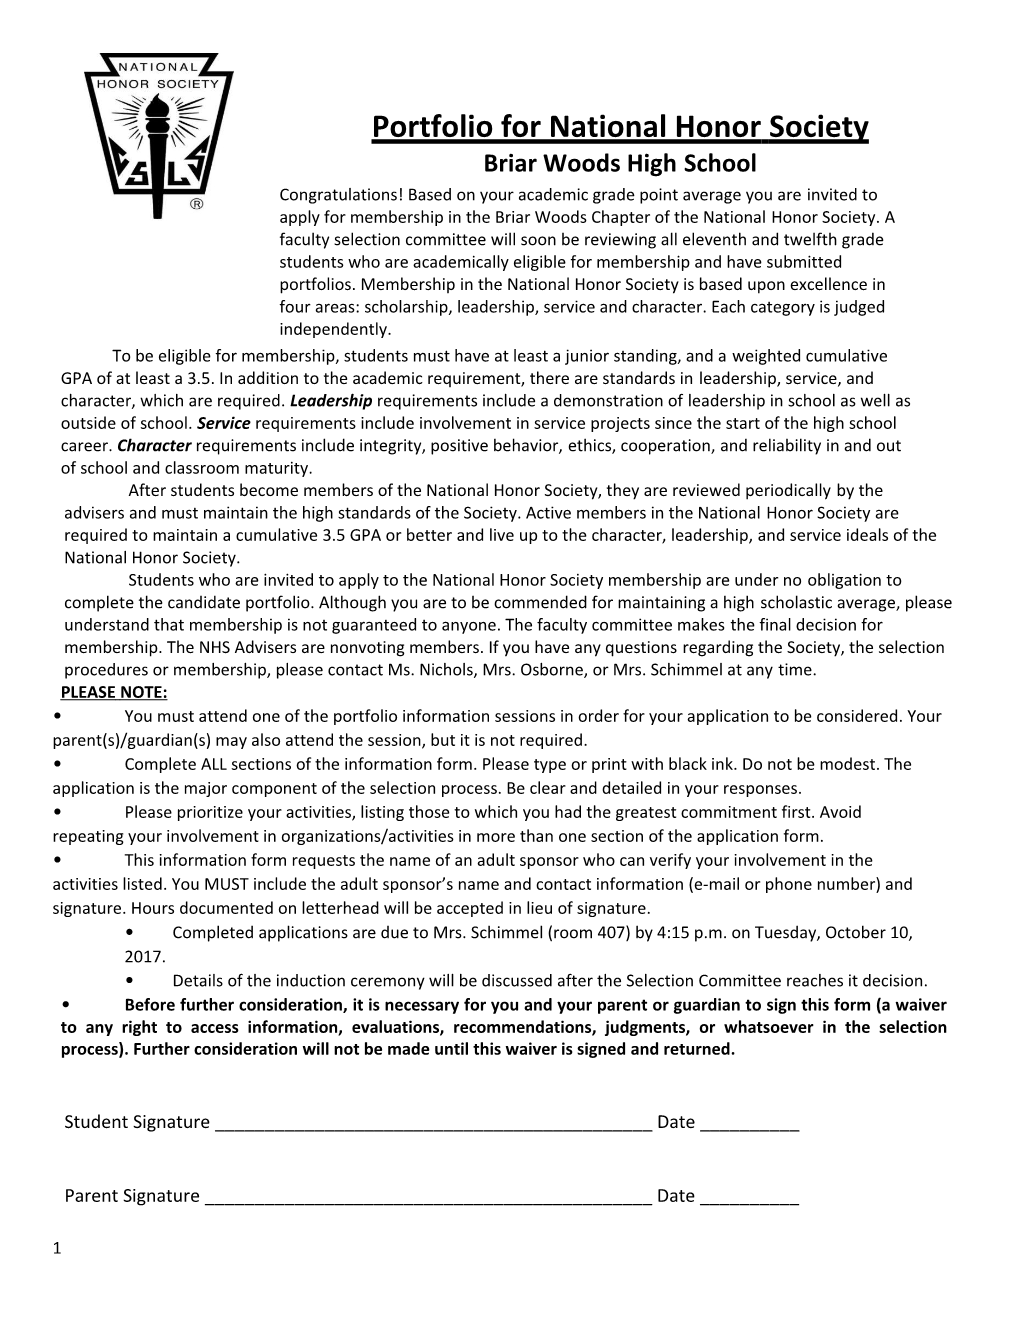 Application for National Honor Society